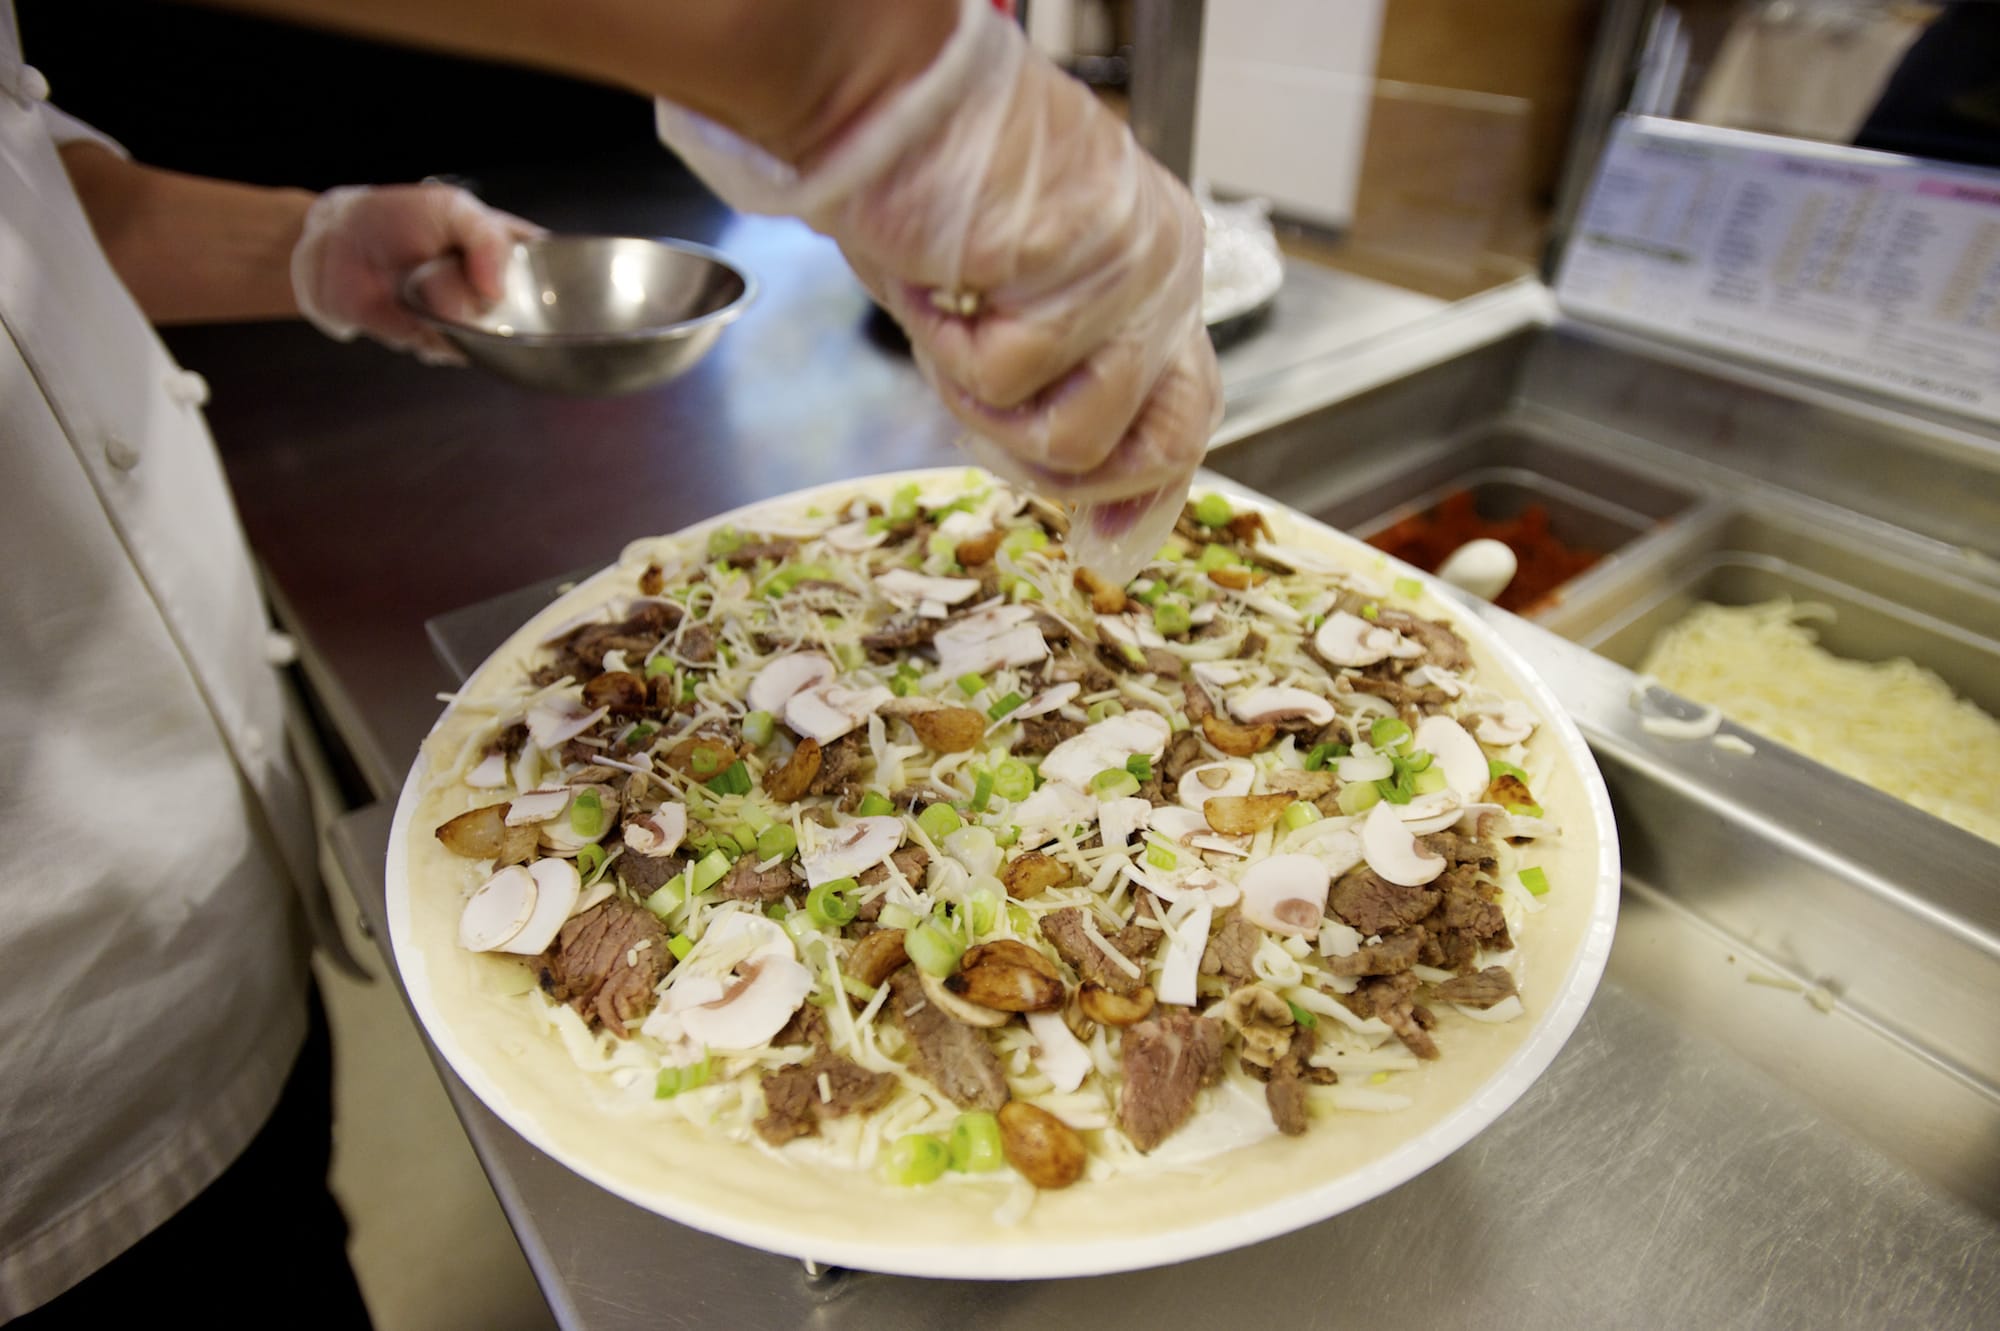 Vancouver-based take-and-bake pizza maker Papa Murphy's went public in May with an initial stock offering of $11.05 per share.